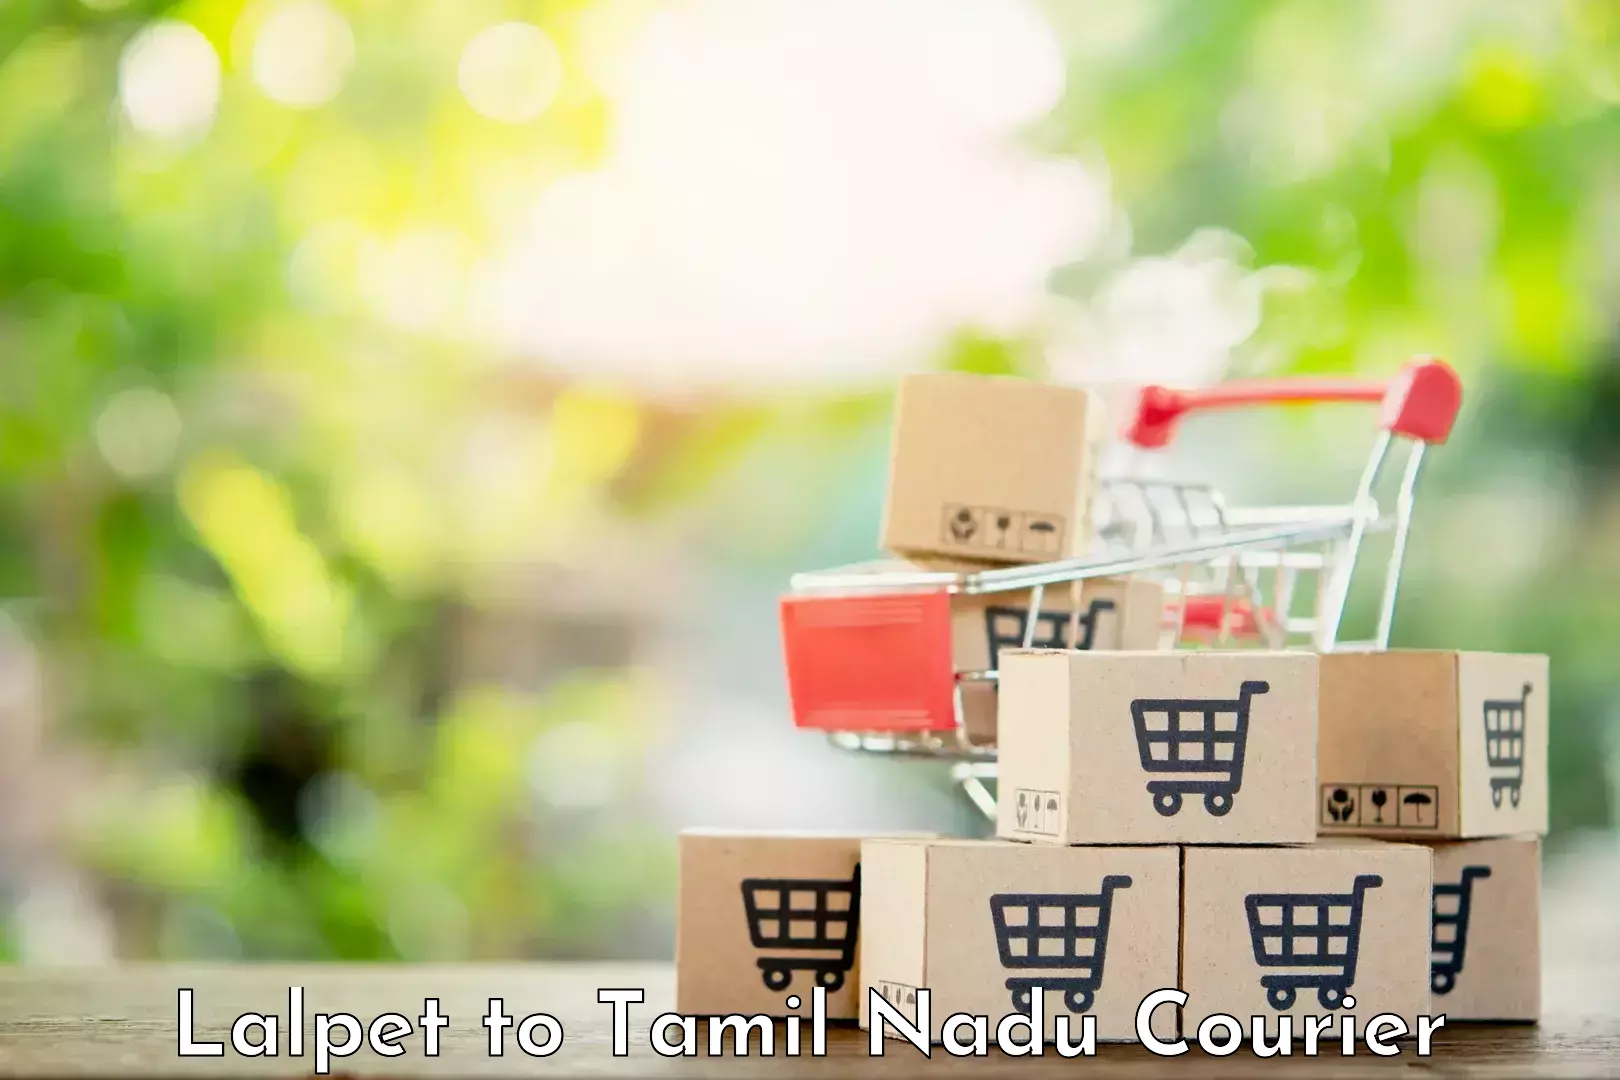 Package delivery network Lalpet to Tamil Nadu